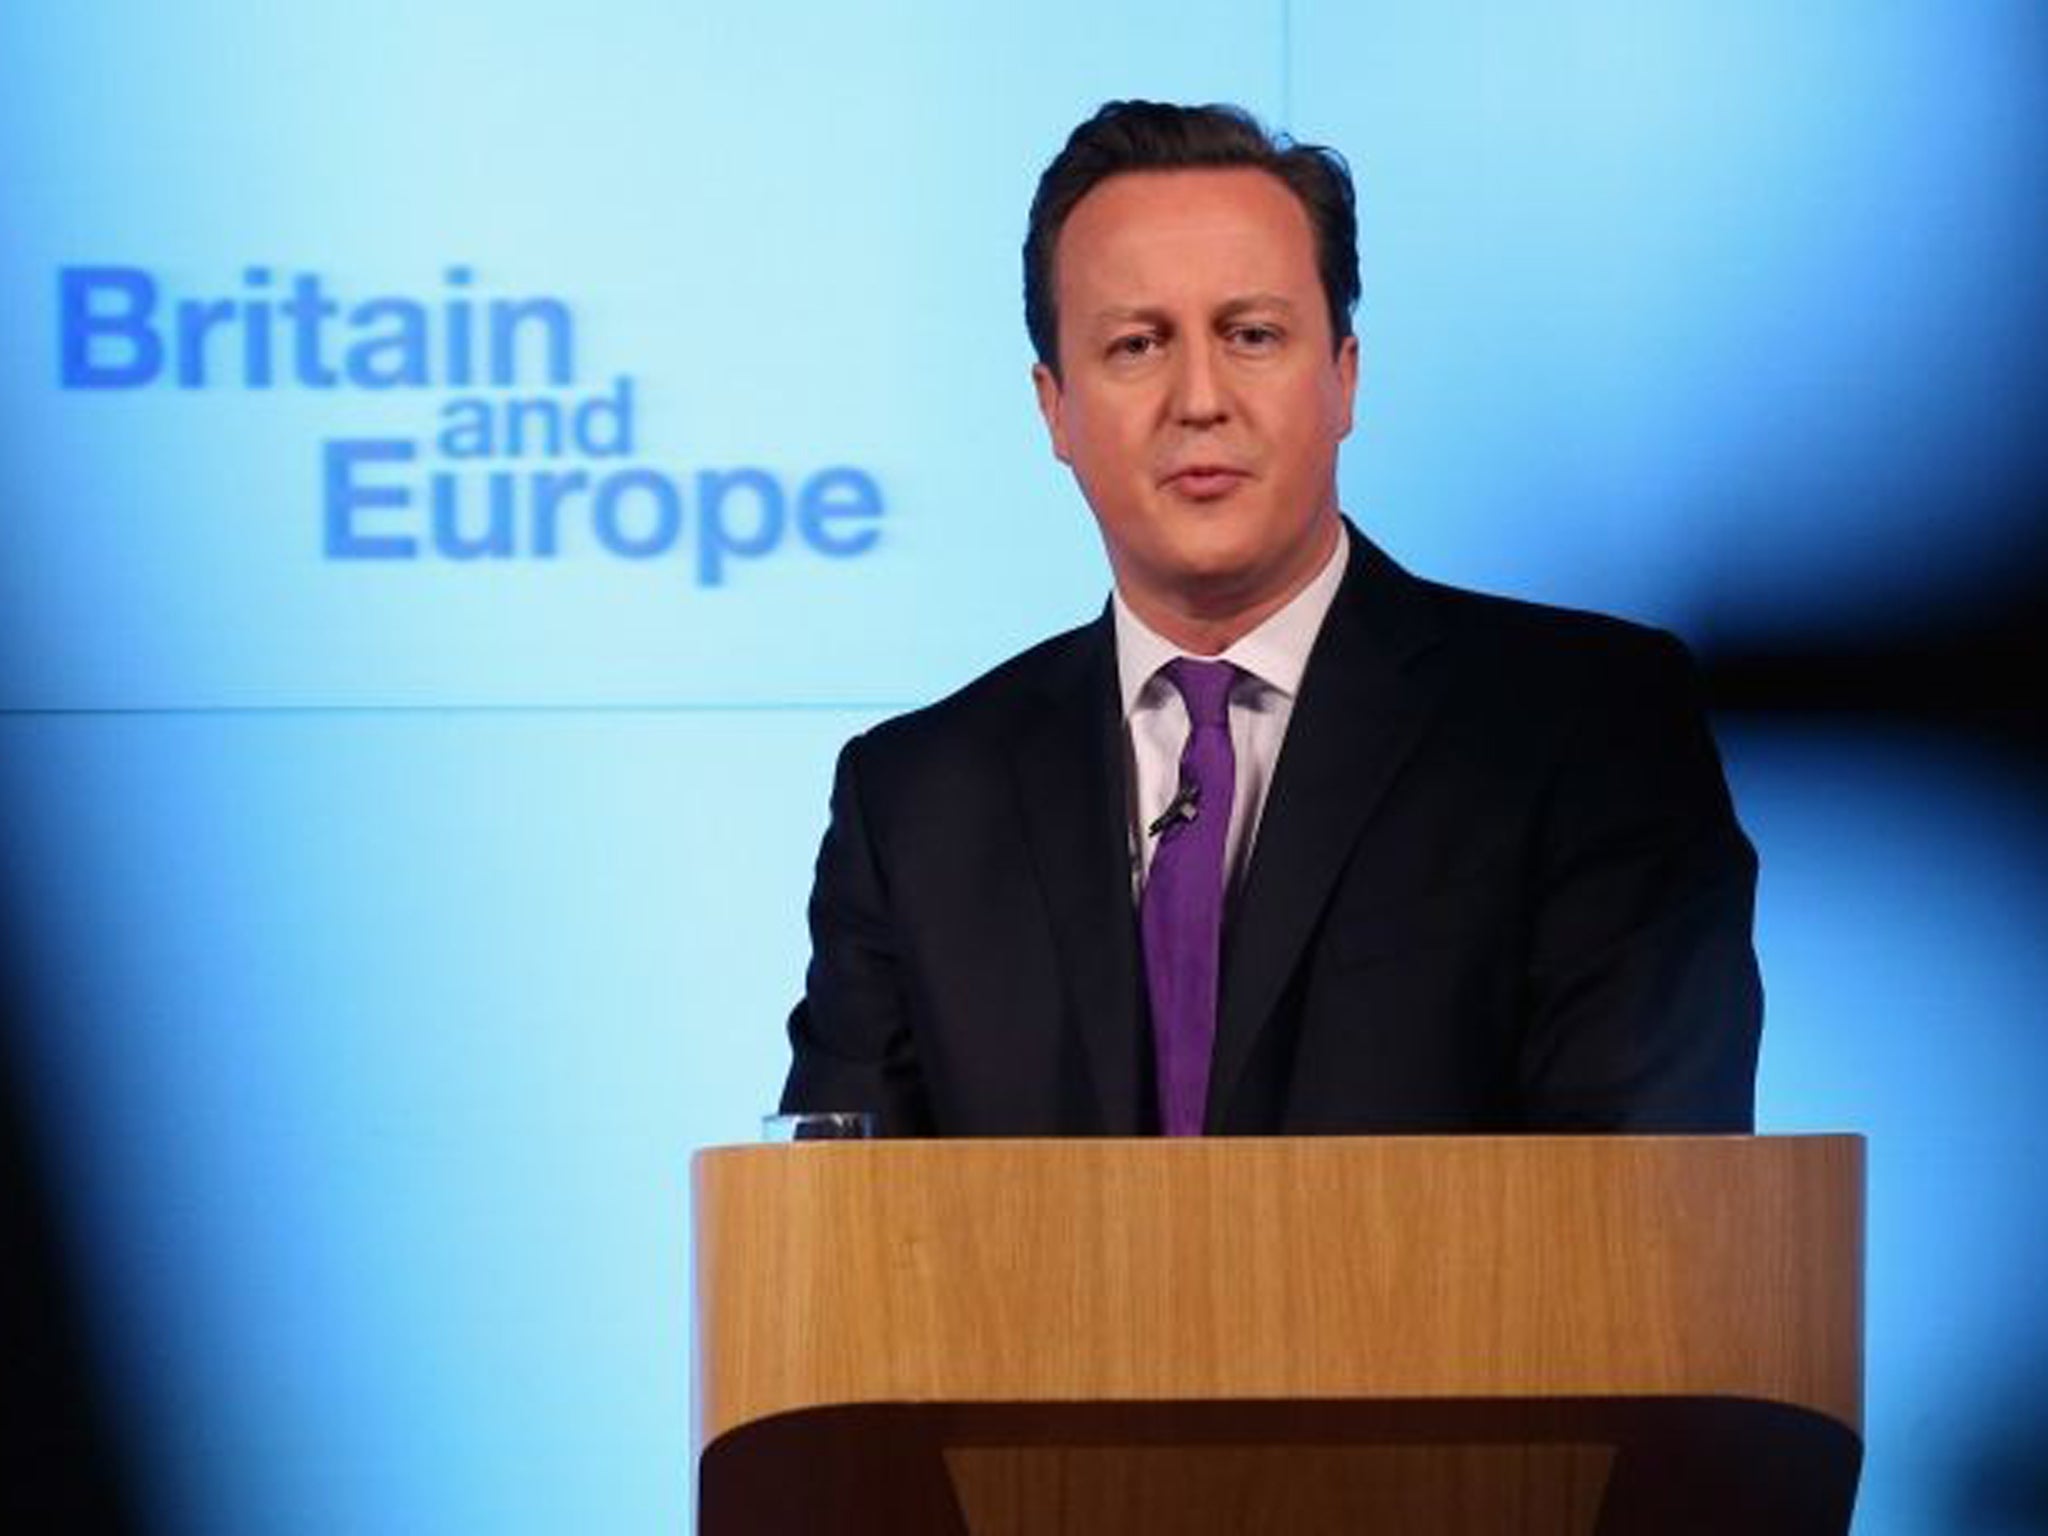 David Cameron's speech prompted the question 'what has the EU ever done for us?'